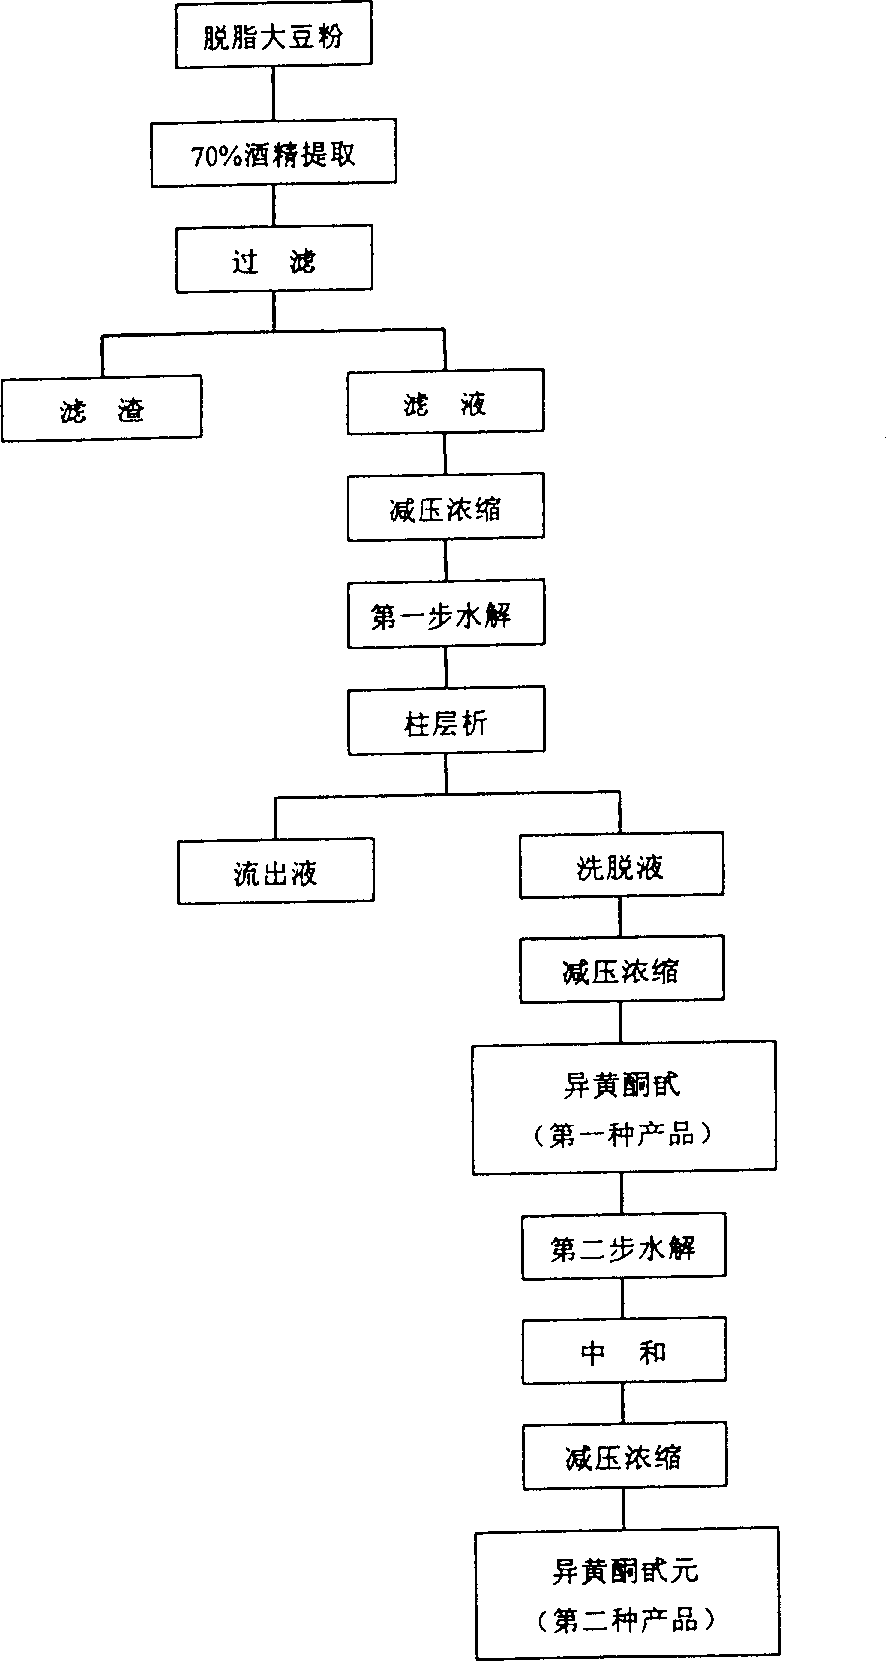 Method for extracting isoflavone from soybean